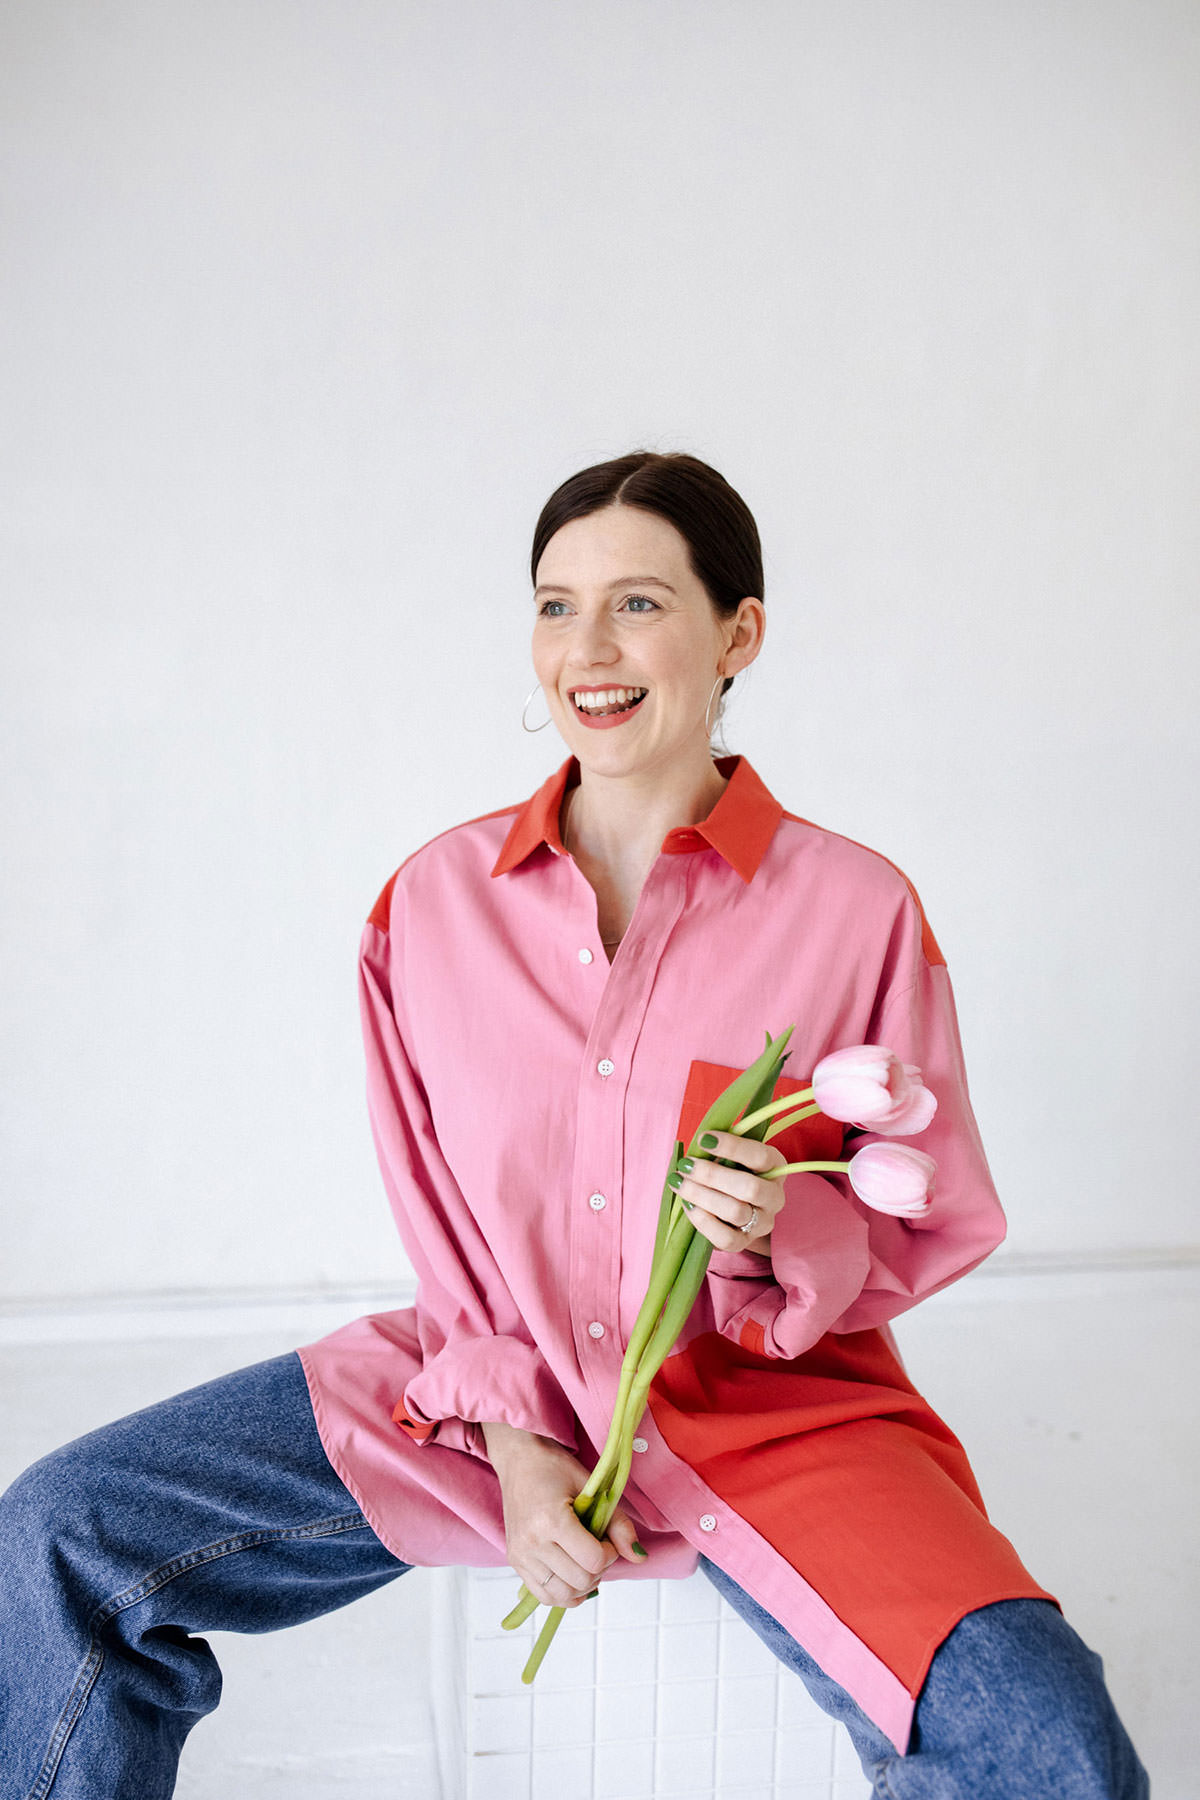 amy pearson smiling holding flowers pink shirt